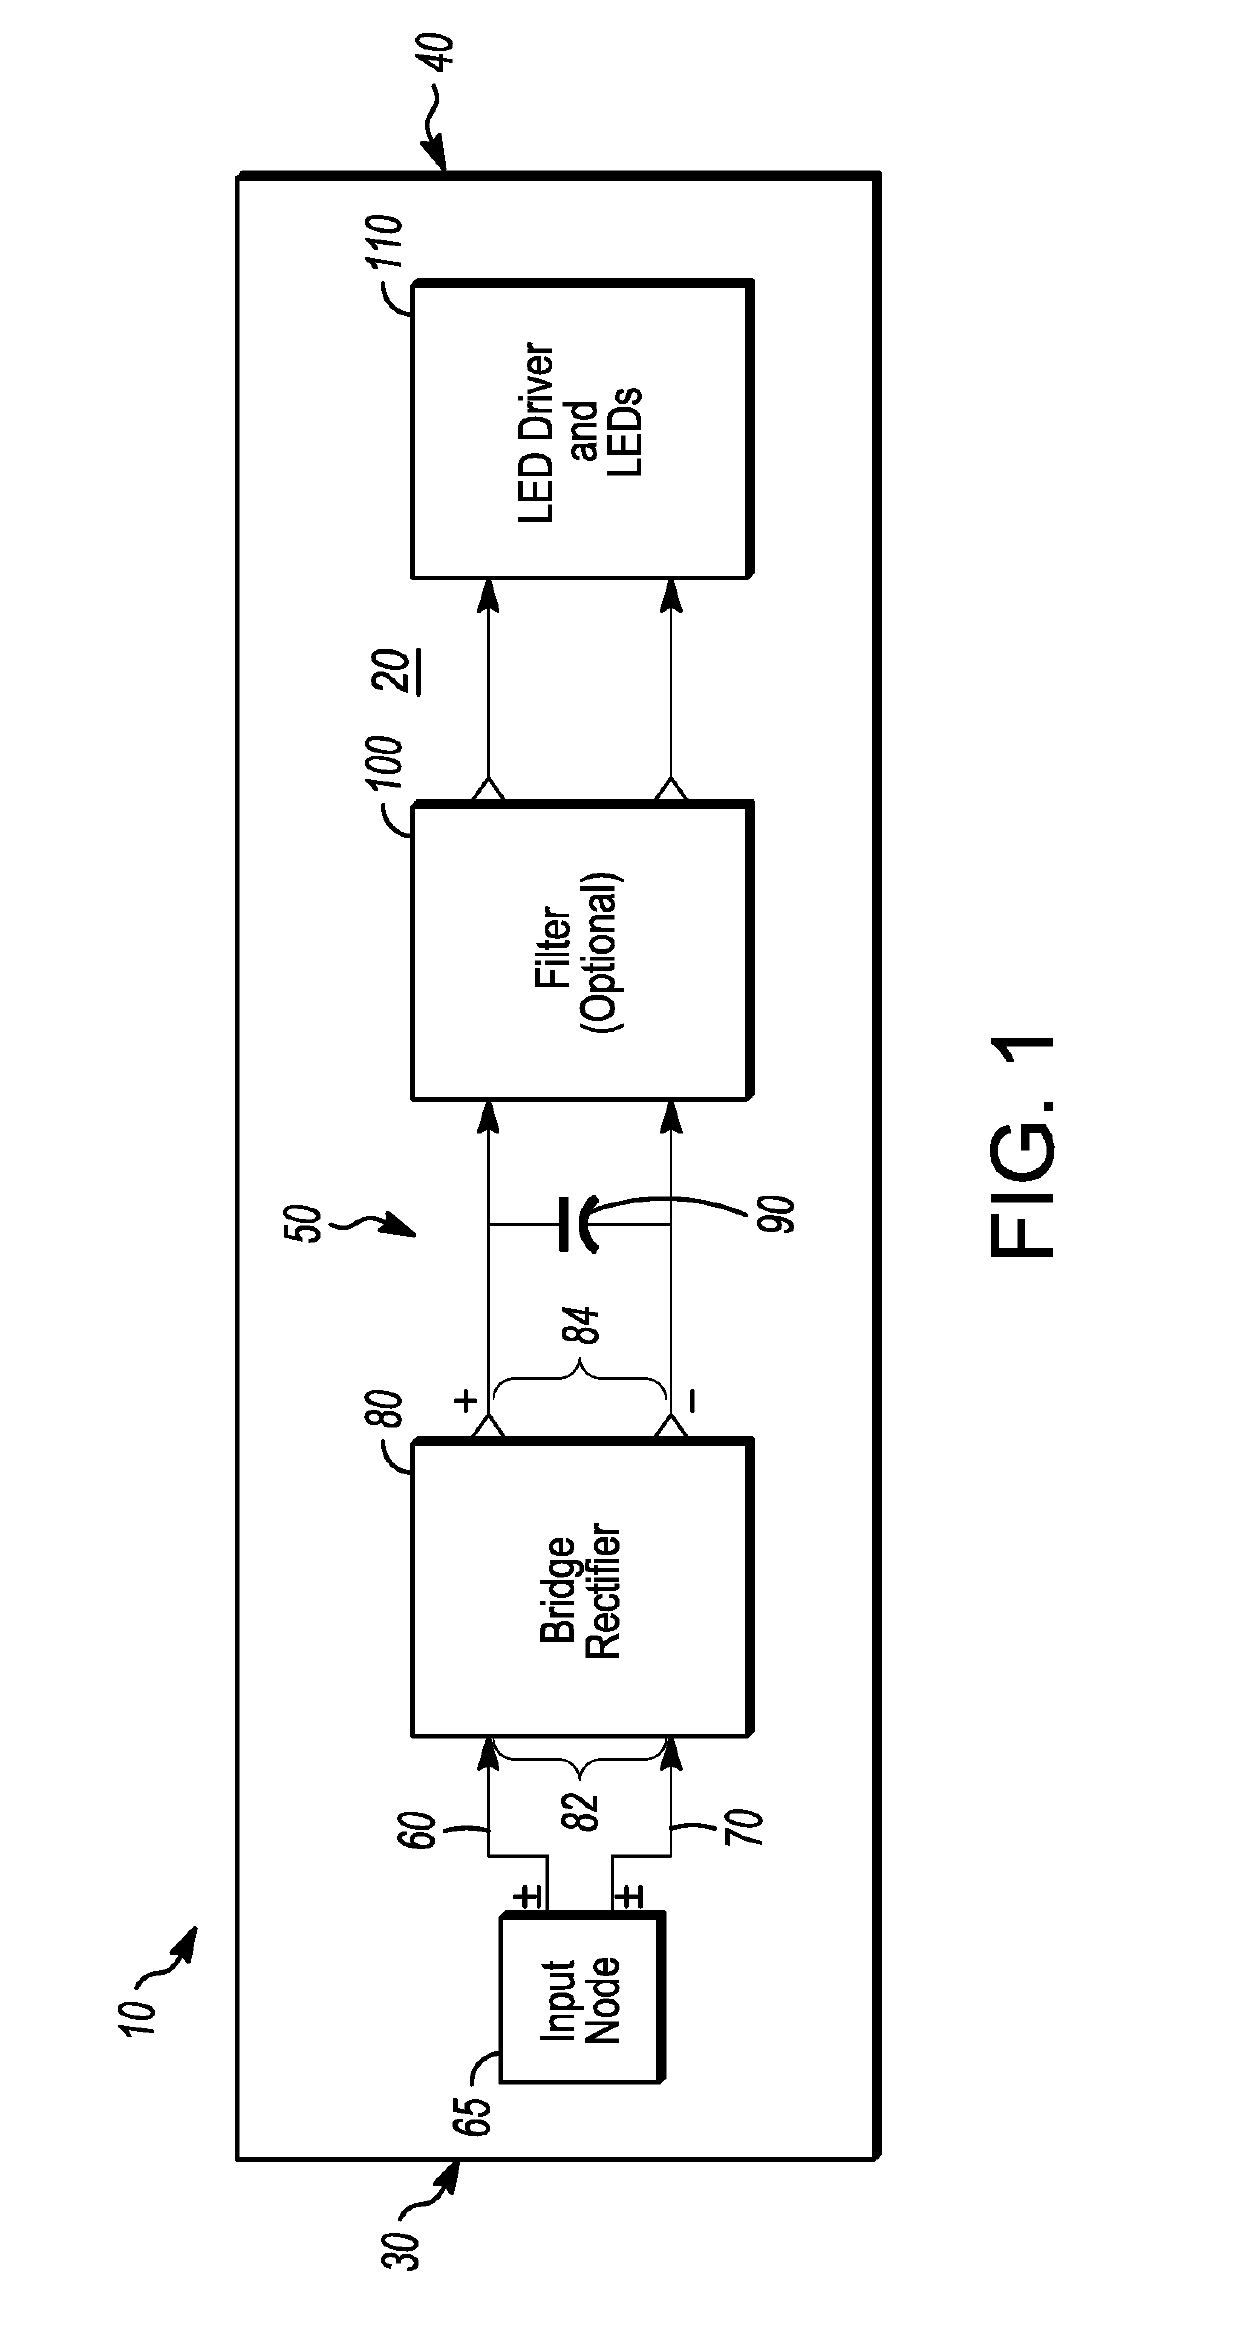 Universal ac and DC input modular interconnectable printed circuit board for power distribution management to light emitting diodes